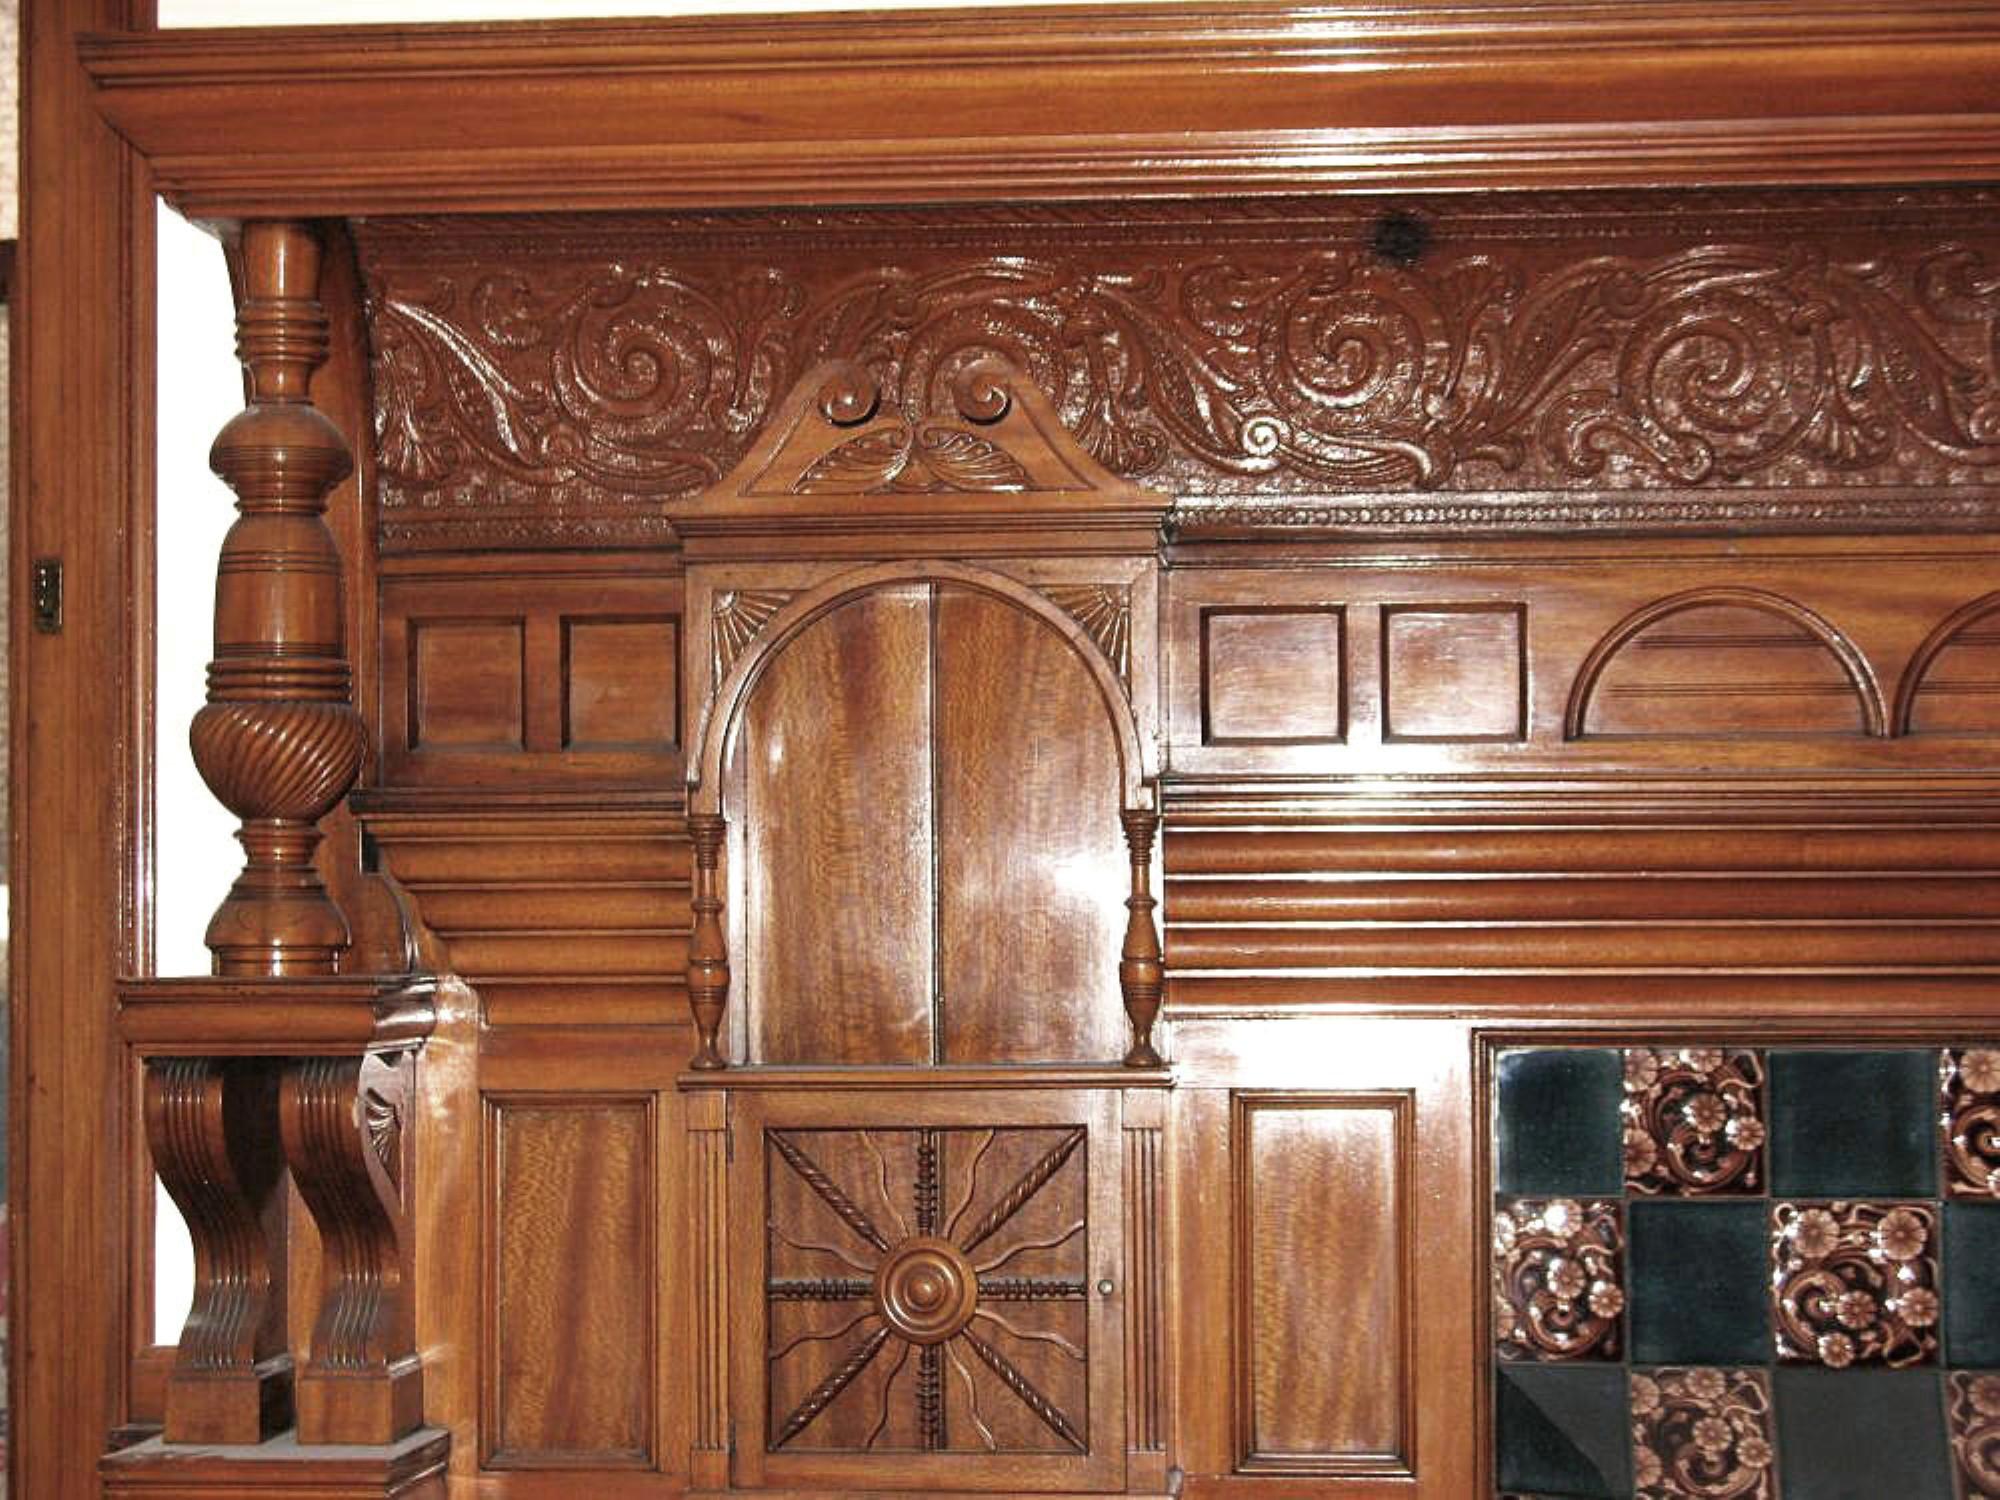 Carved panels decorate the façade of this 1880s Victorian mantel as well as turned columns and stately corbels. Carved side panel and original tiles not included. Please note, this item is located in our Scranton, PA location.